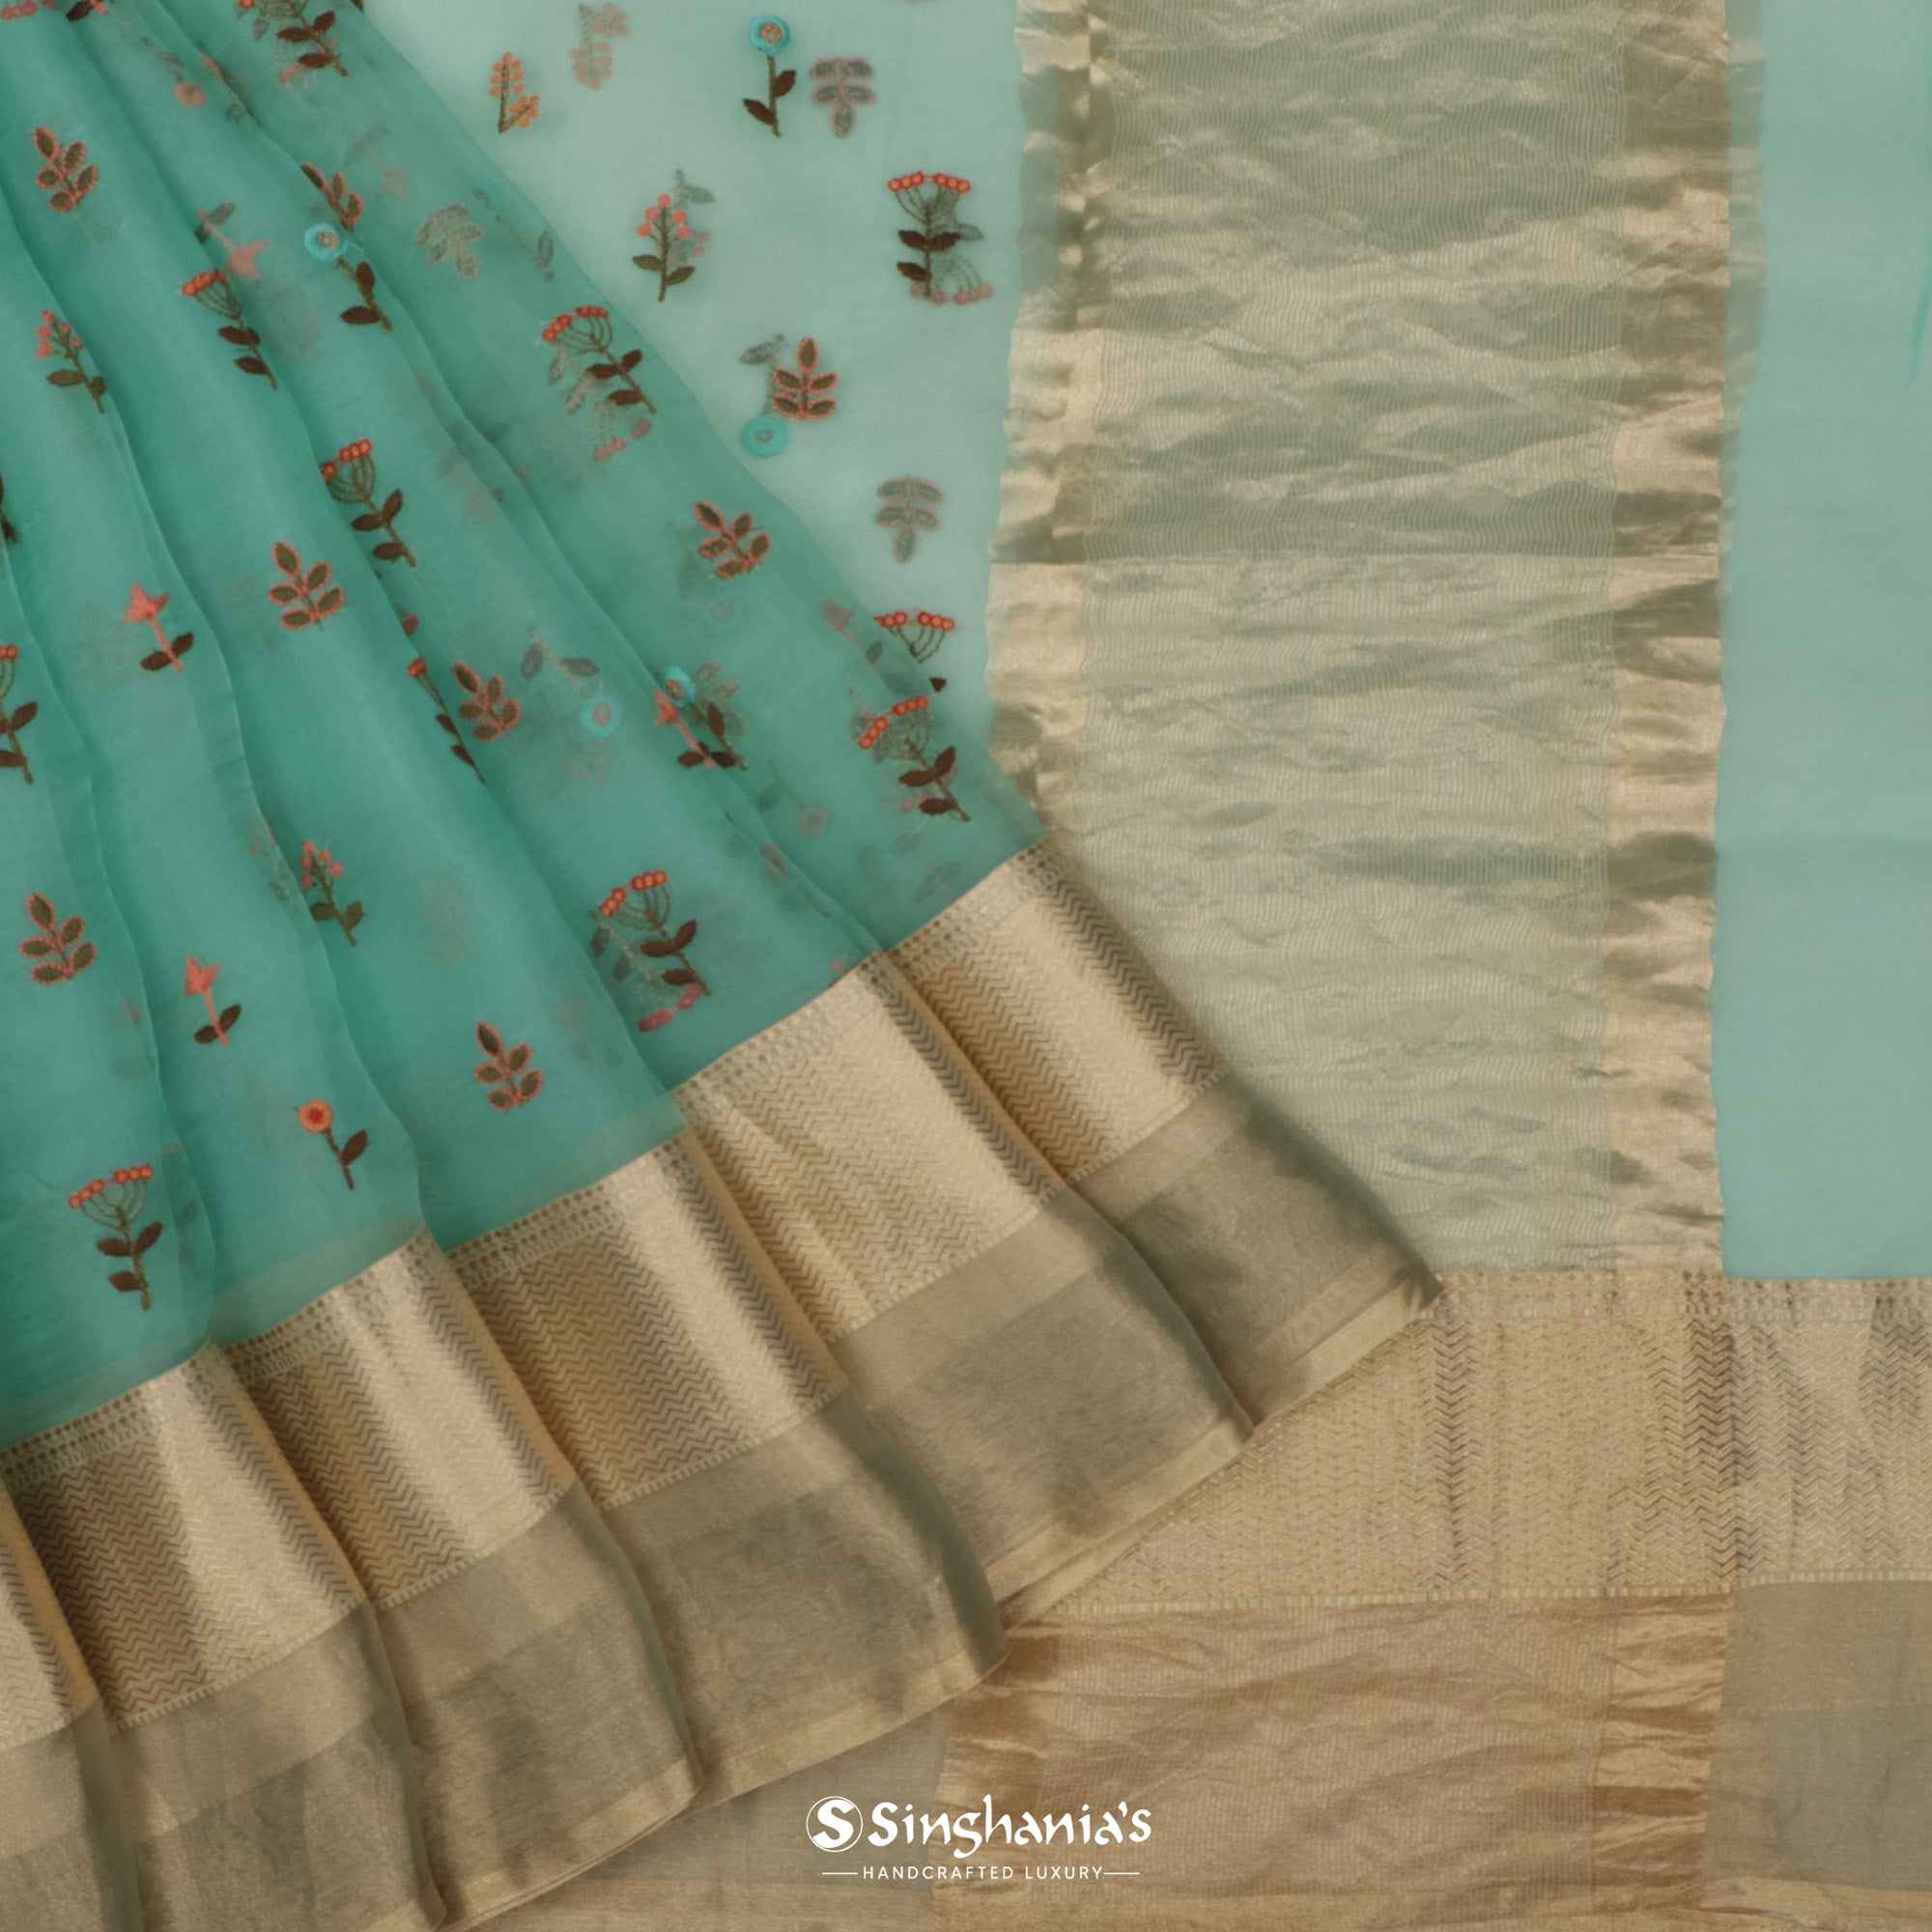 Tiffany Blue Organza Saree With Floral Embroidery